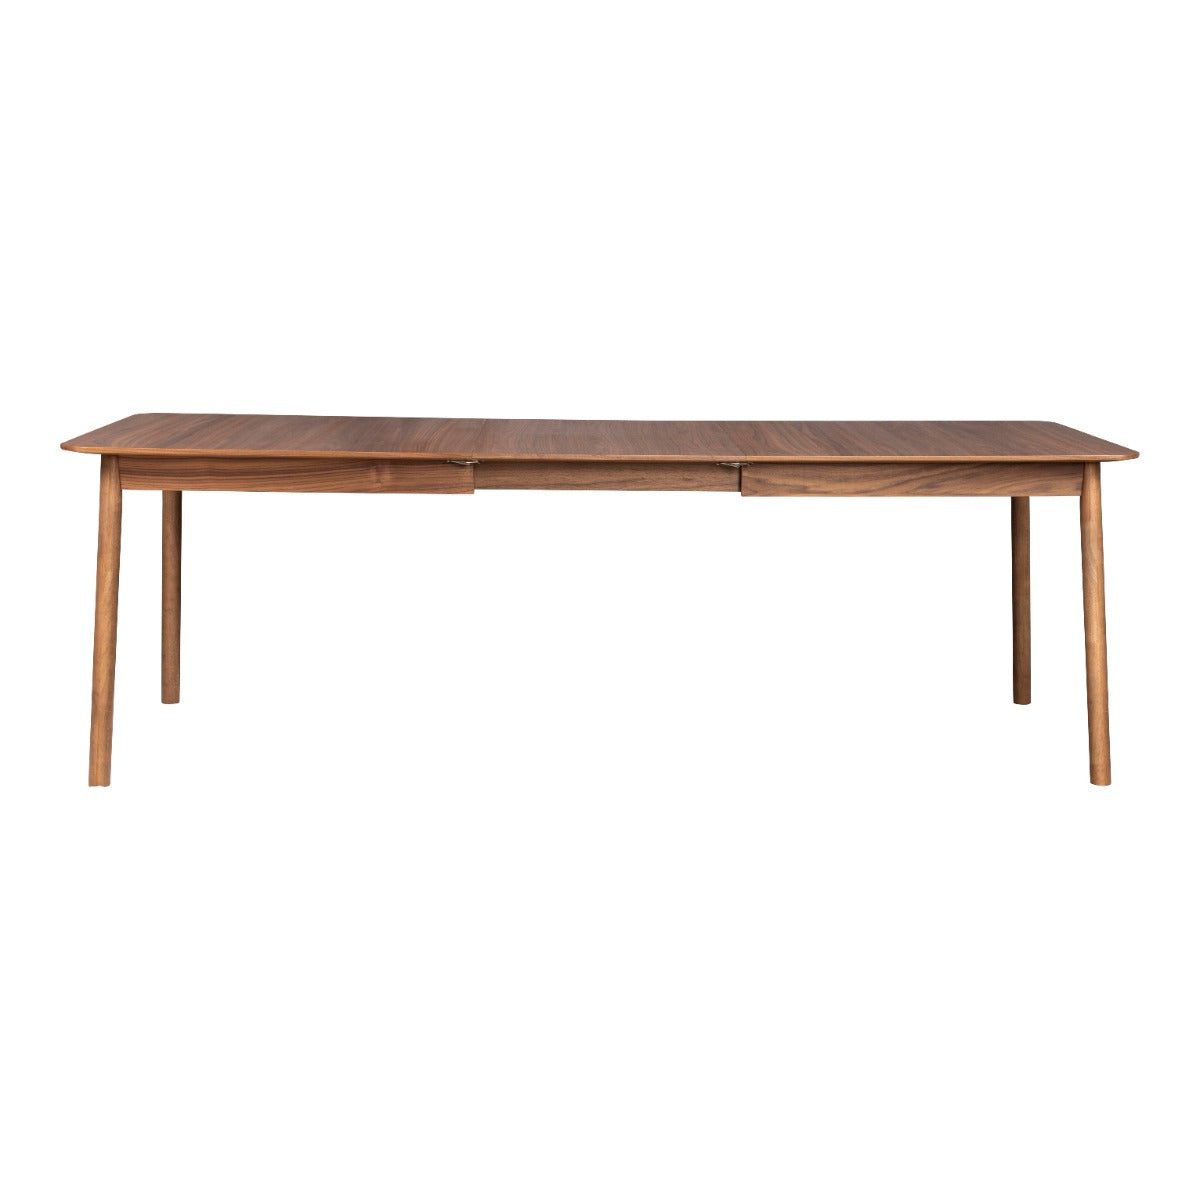 GLIMPS table 180/240 x 90 walnut, Zuiver, Eye on Design